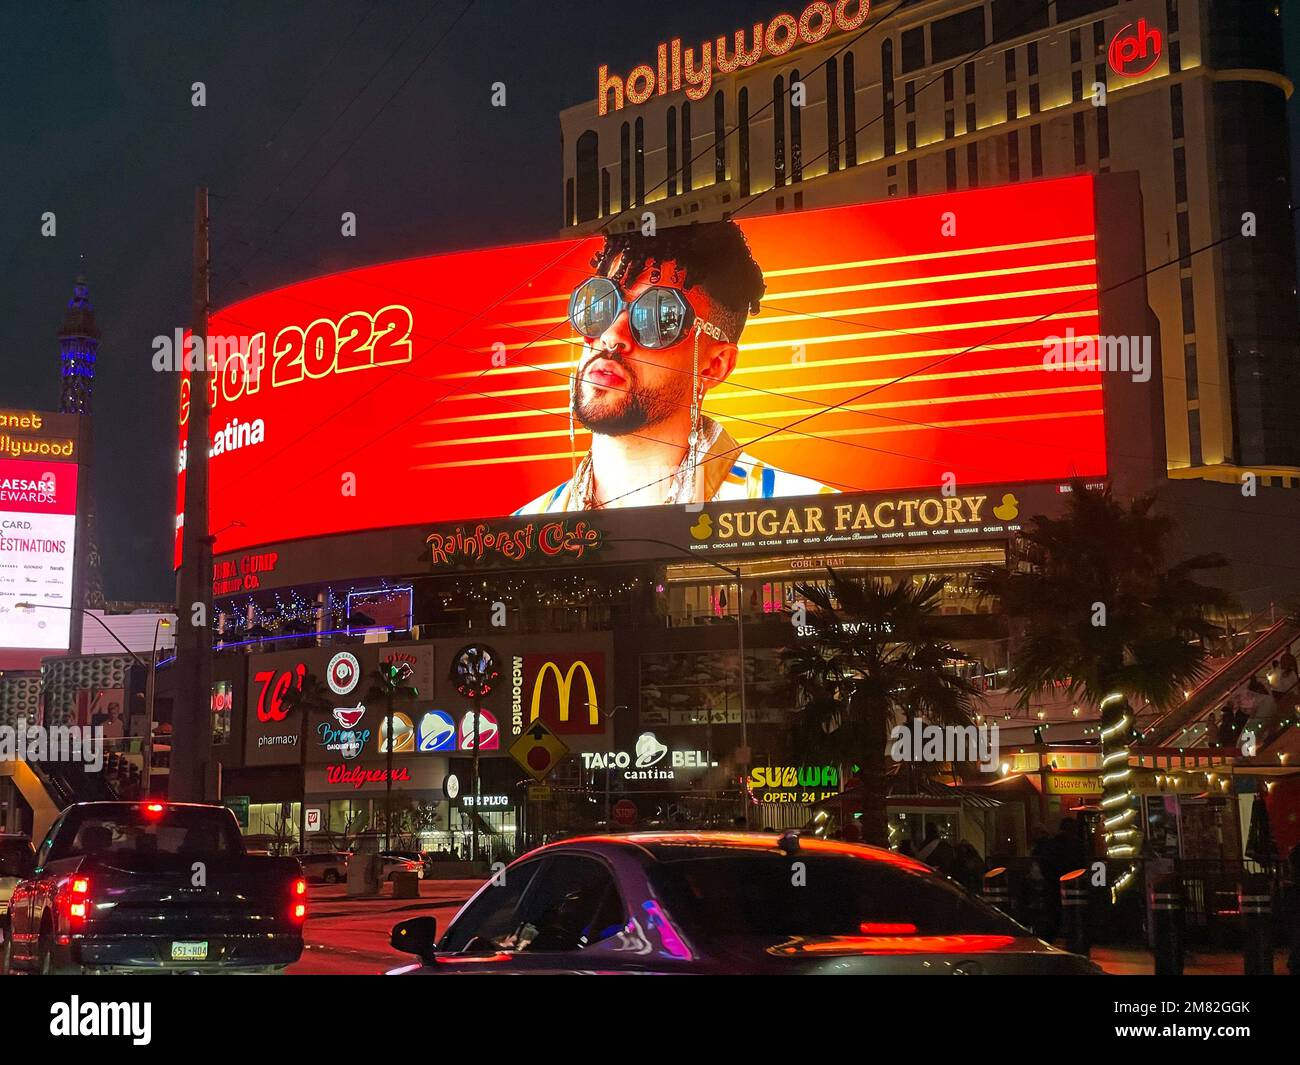 A large digital billboard promoting entertainment in front of the Planet Hollywood hotel on the Strip in Las Vegas, Nevada, USA Stock Photo